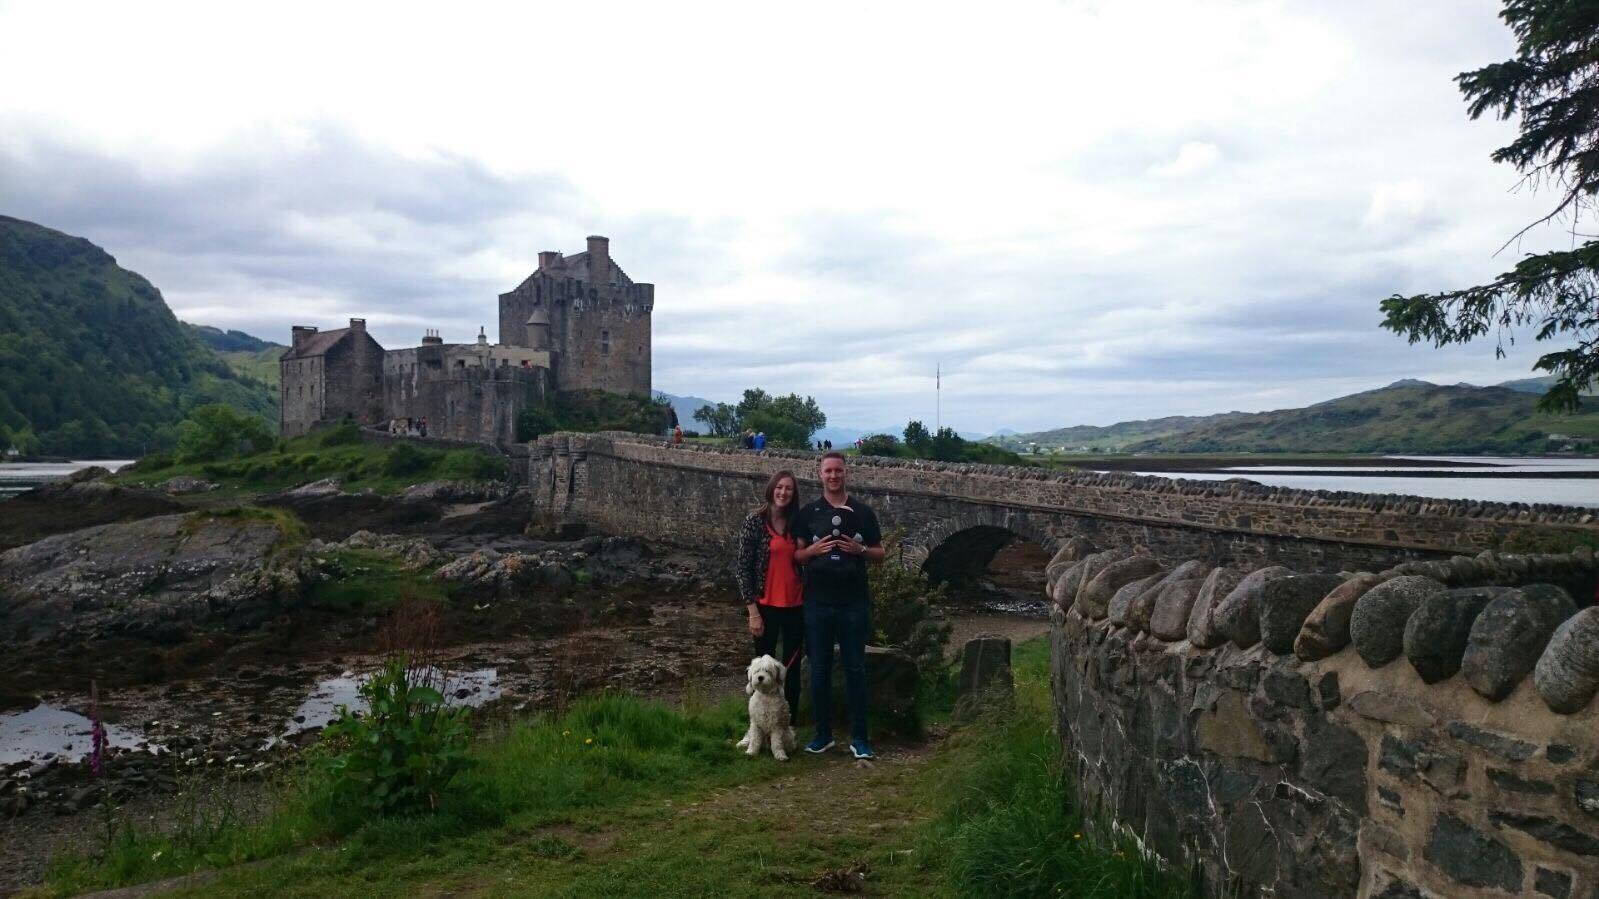 Mark, Sarah and Oliver with the family dog during their visit to the castle when the camera was lost.